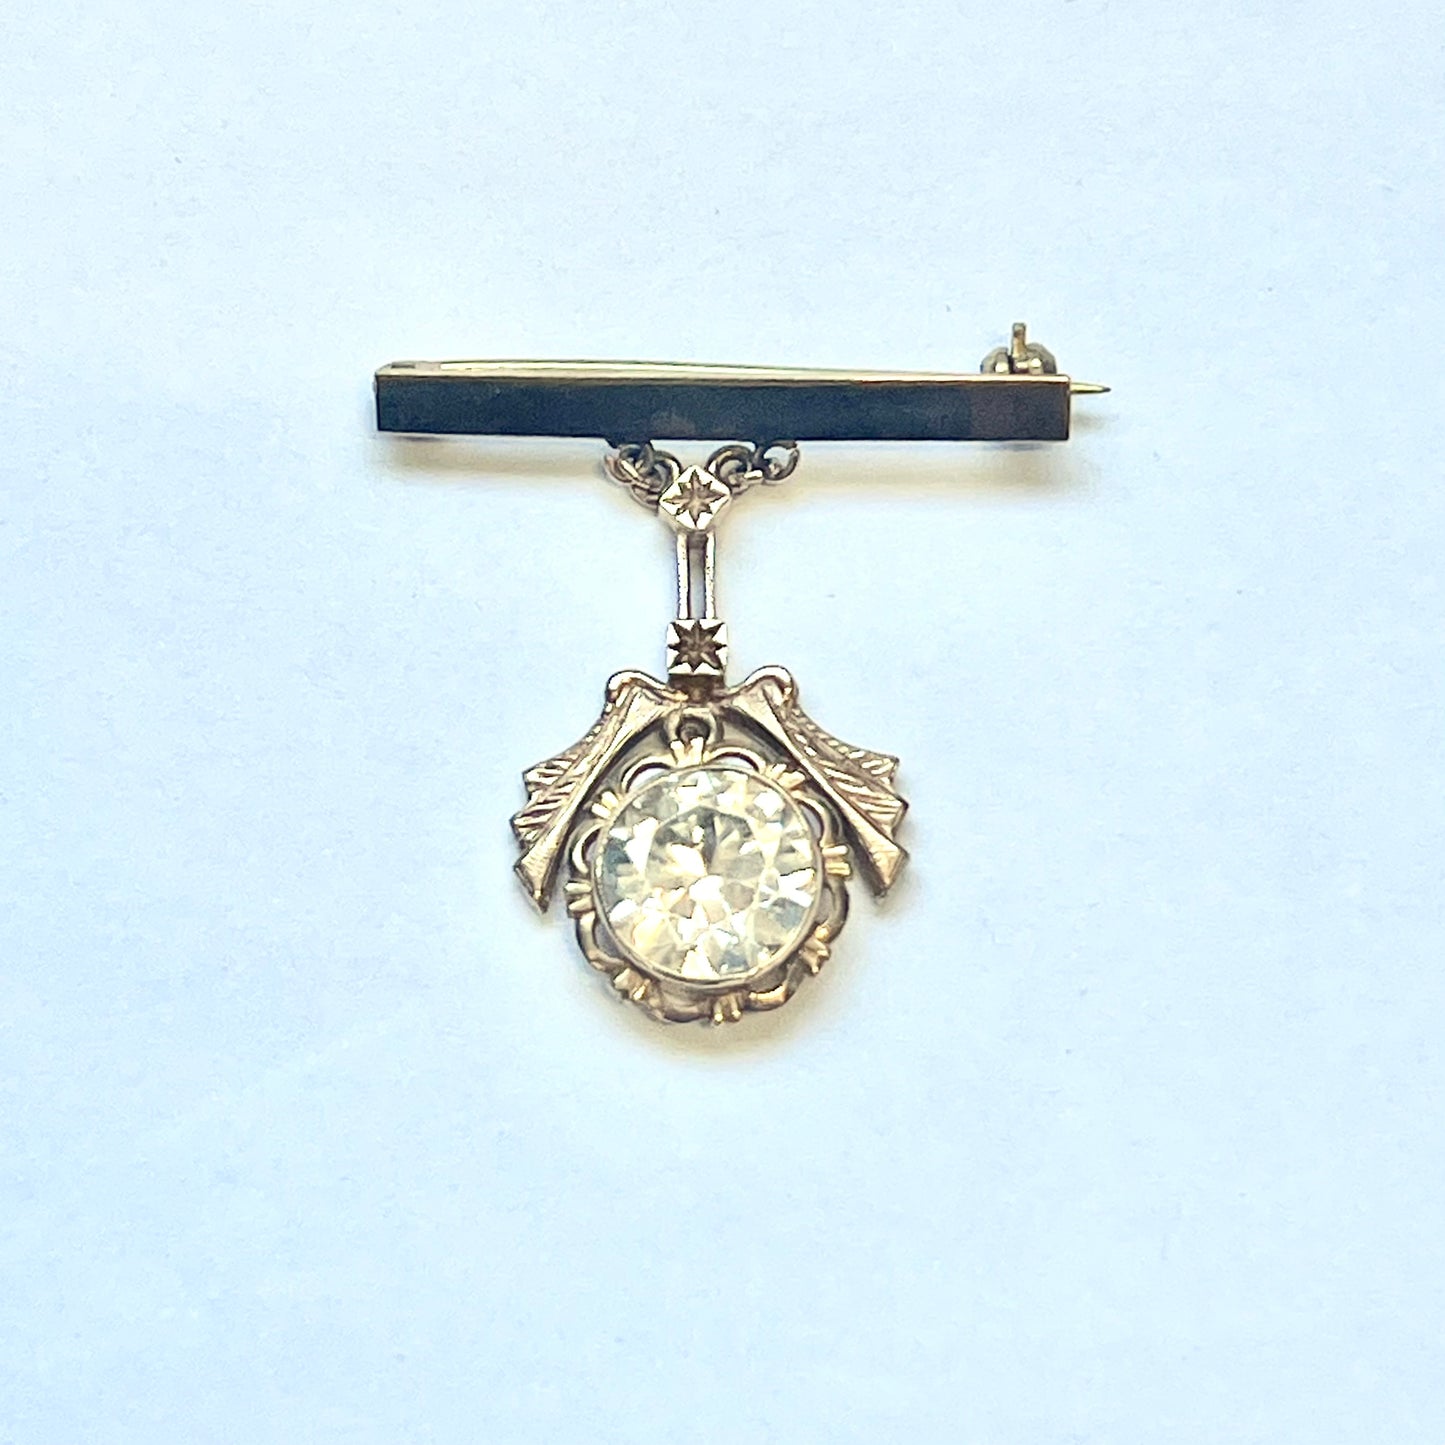 9ct yellow gold bar brooch, with wreath detail and sparkling diamond paste drop. Circa 1940s to 60s